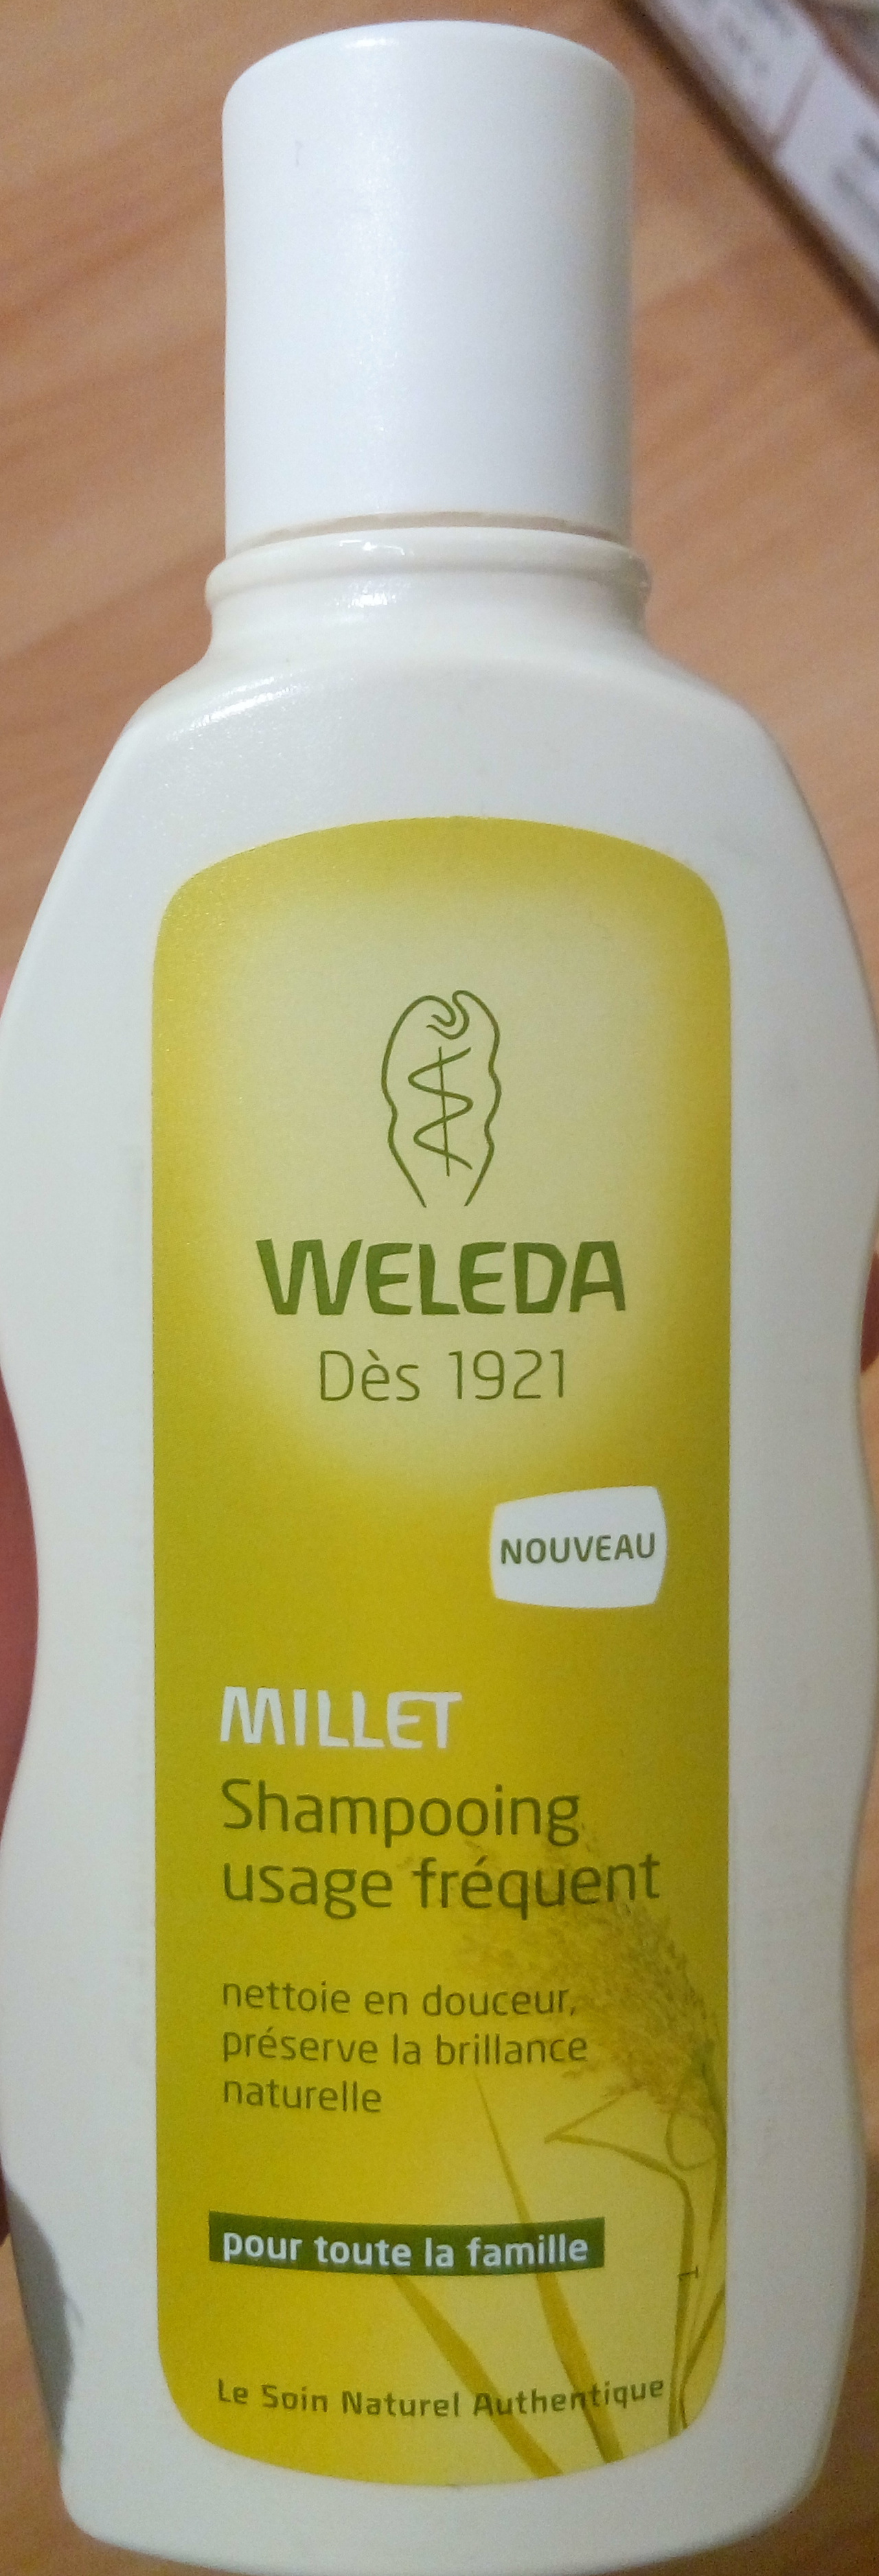 Shampooing usage fréquent Millet - Tuote - fr